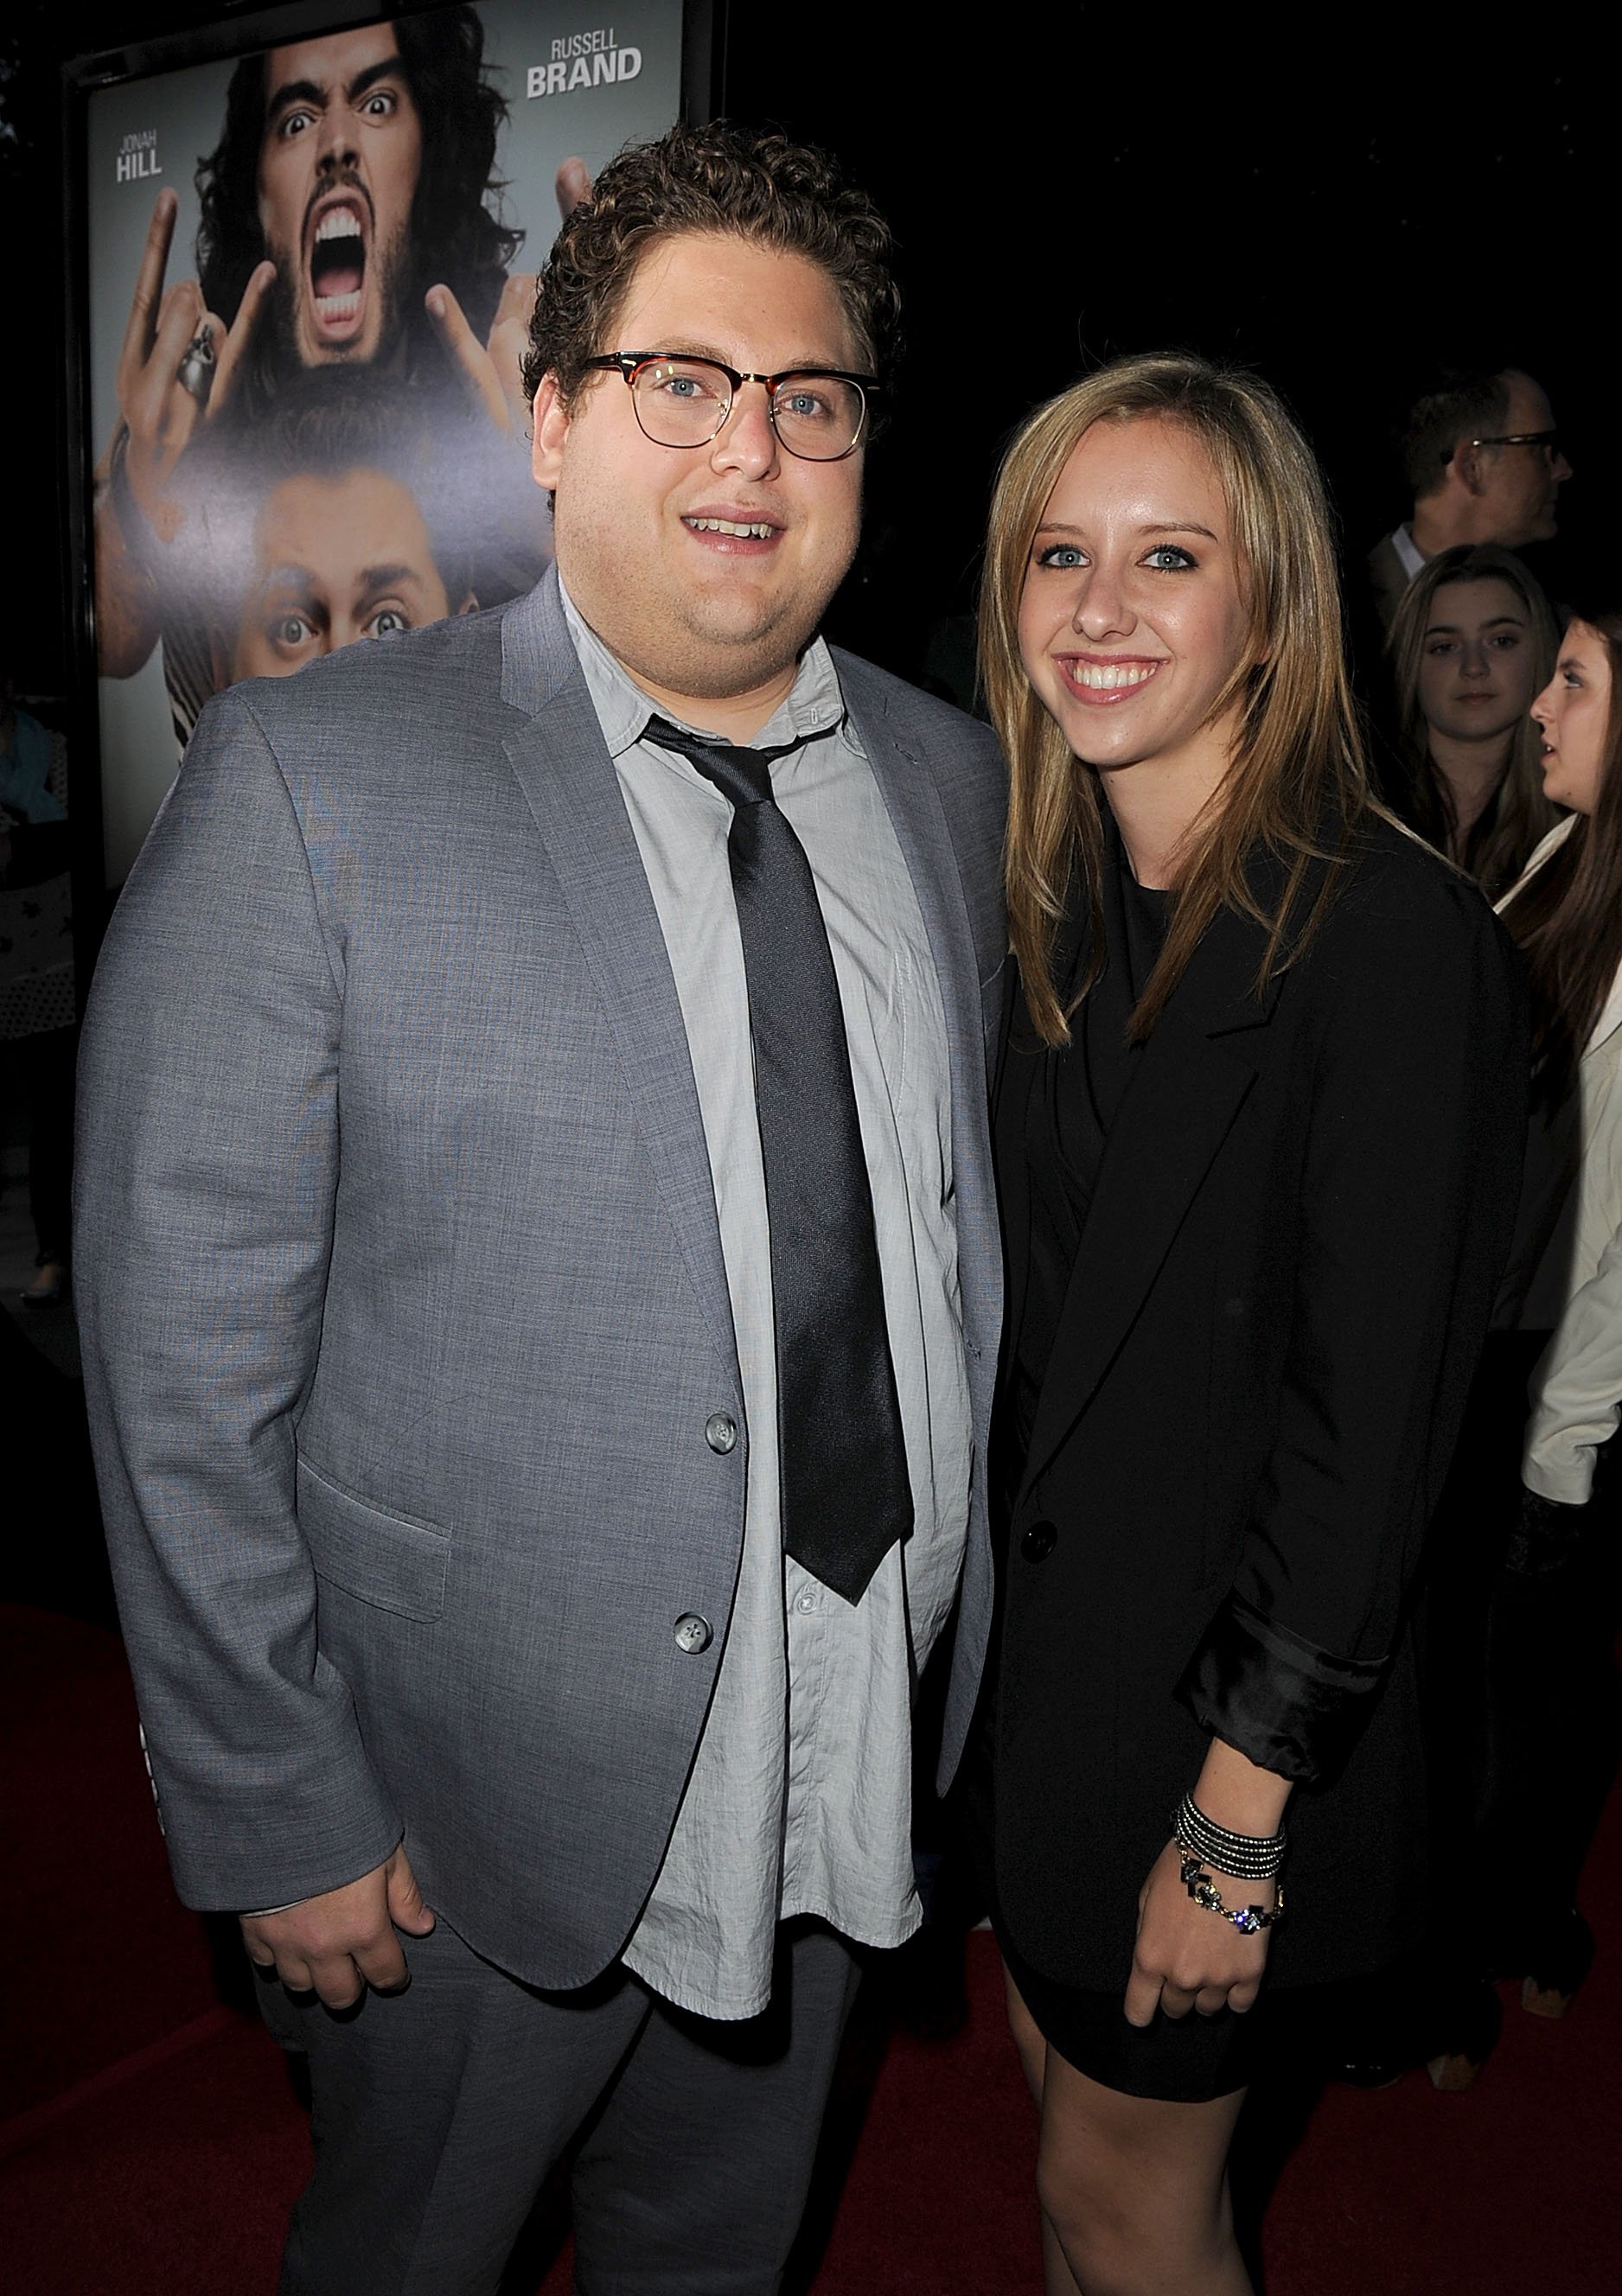 Jonah Hill and his ex-girlfriend Jordan Klein at the "Get Him To The Greek" premiere hosted at the Greek Theatre in Los Angeles, California, on May 25, 2010. | Source: Getty Images